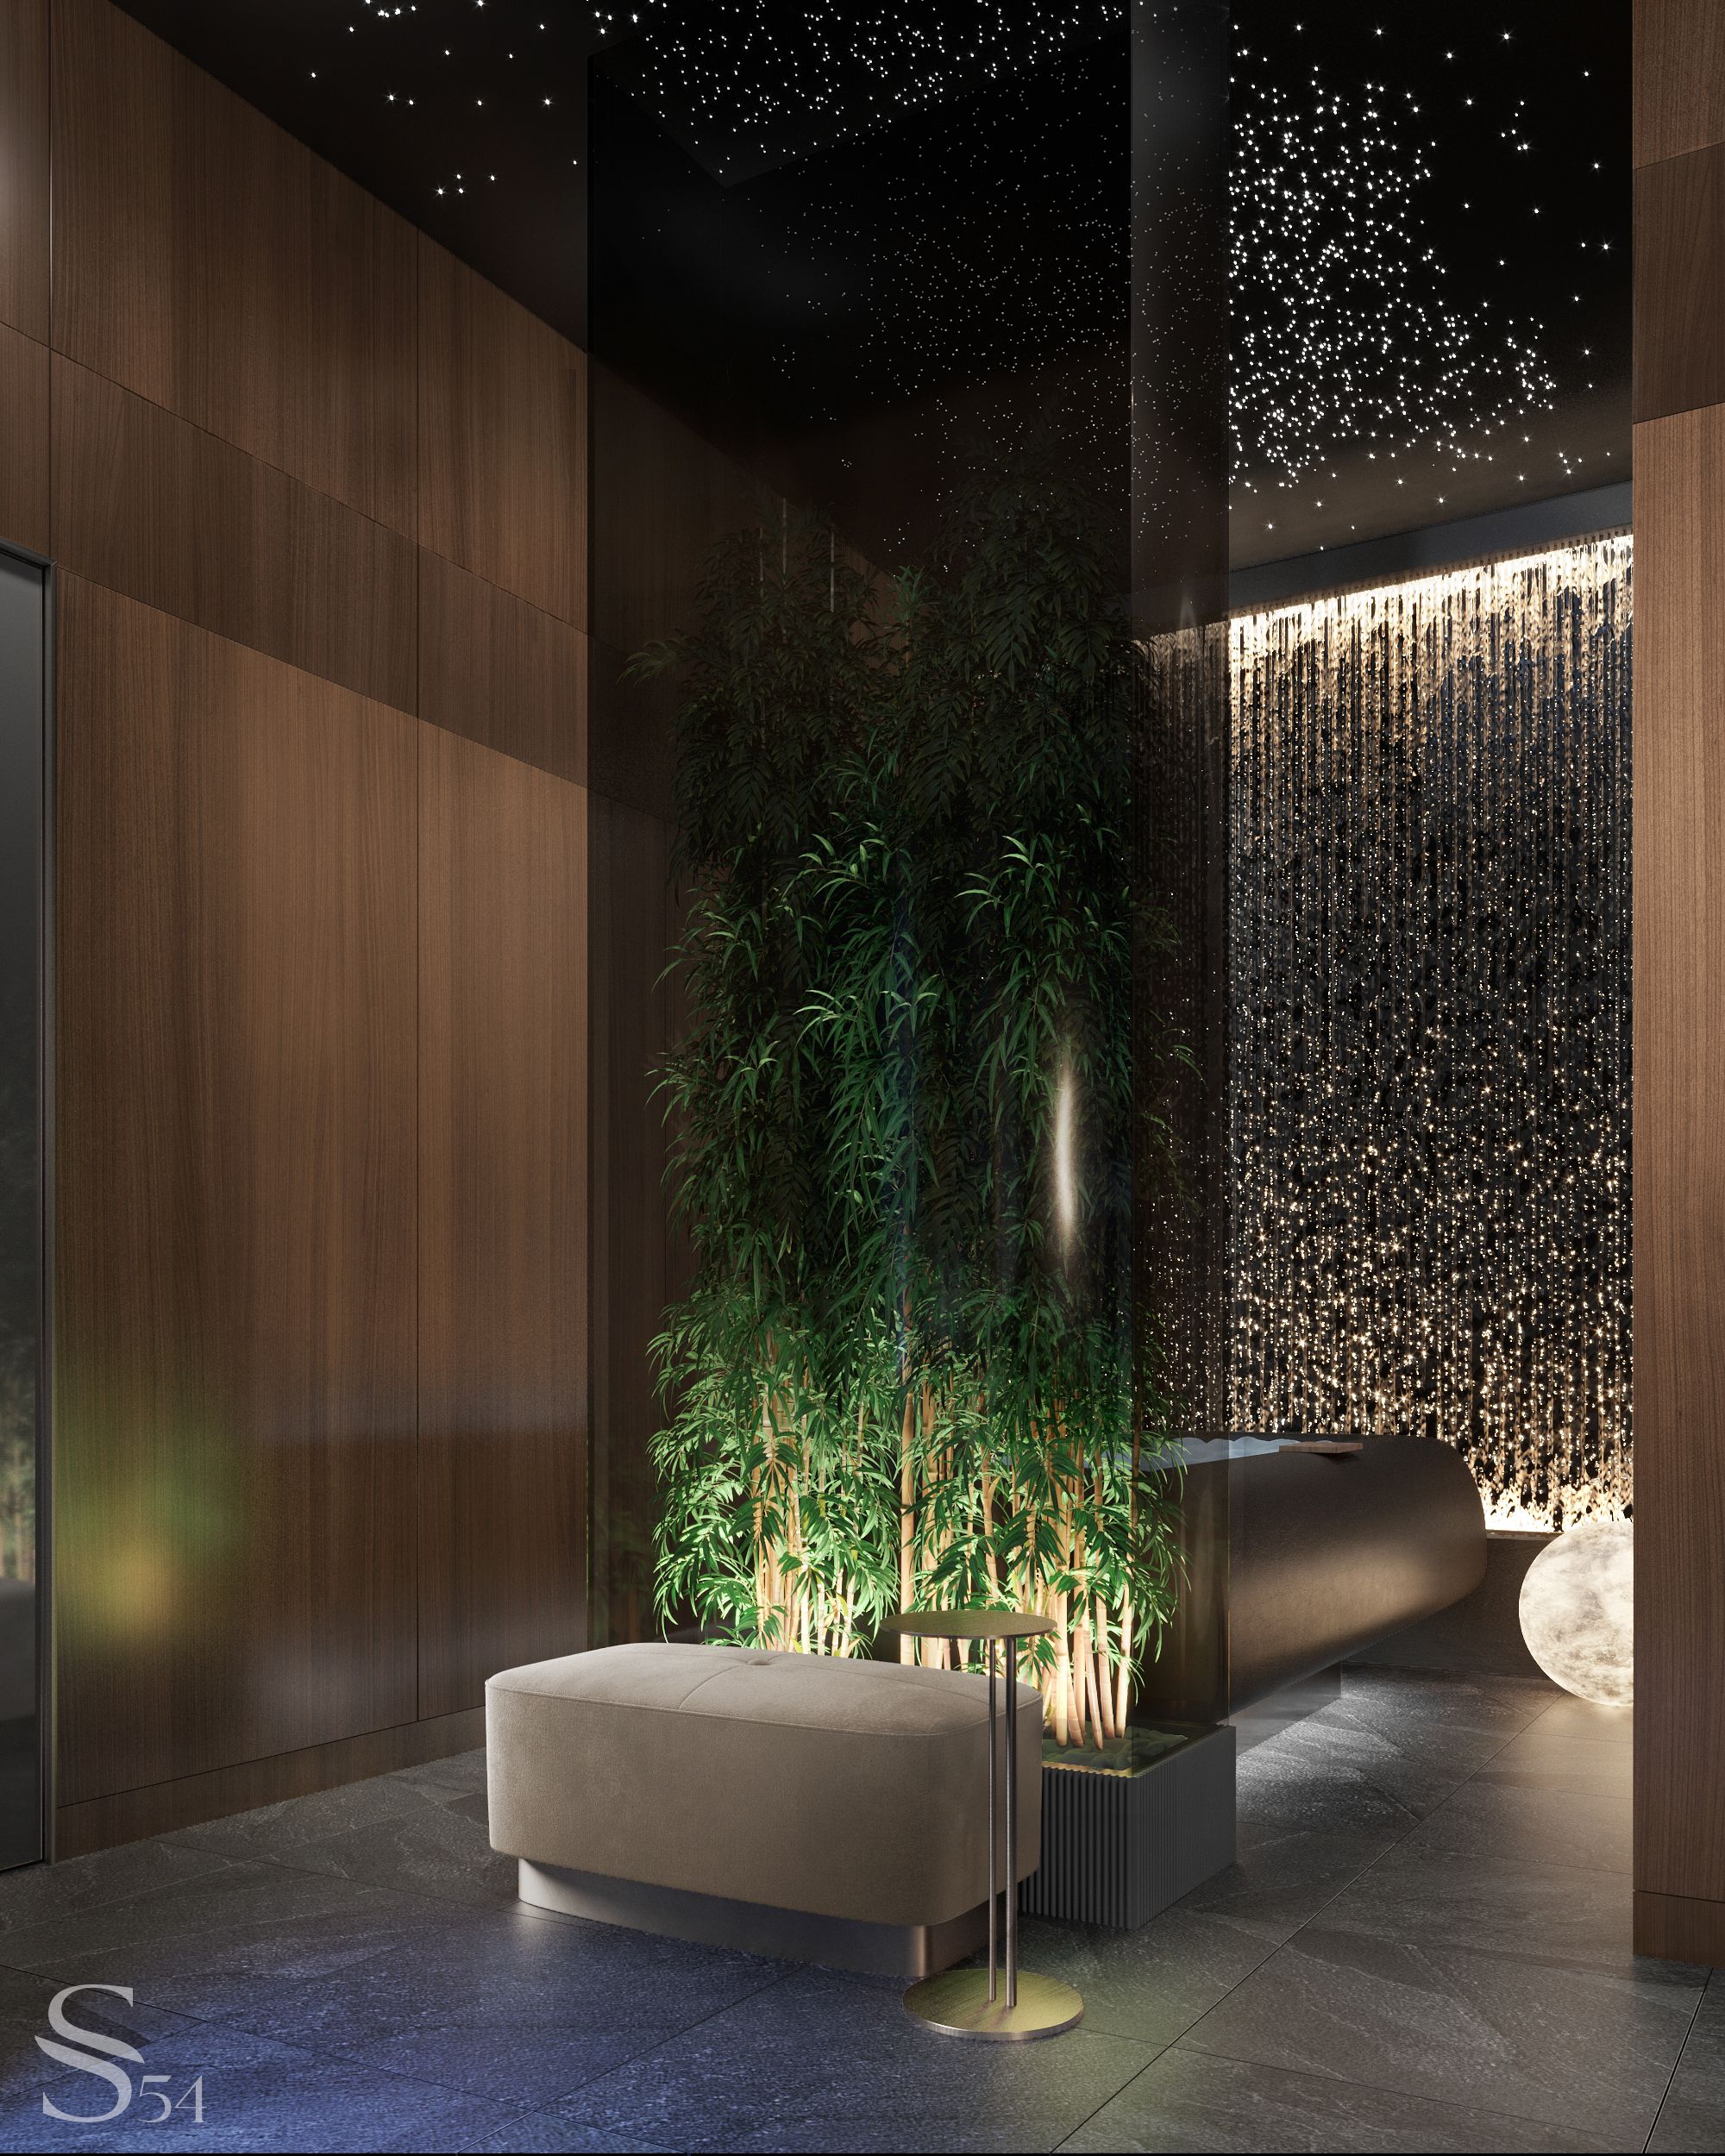 The showers and lobby are finished in marble. The ceiling is decorated with sparkling "starry sky" lighting inspired by the Rolls-Royce gimmick